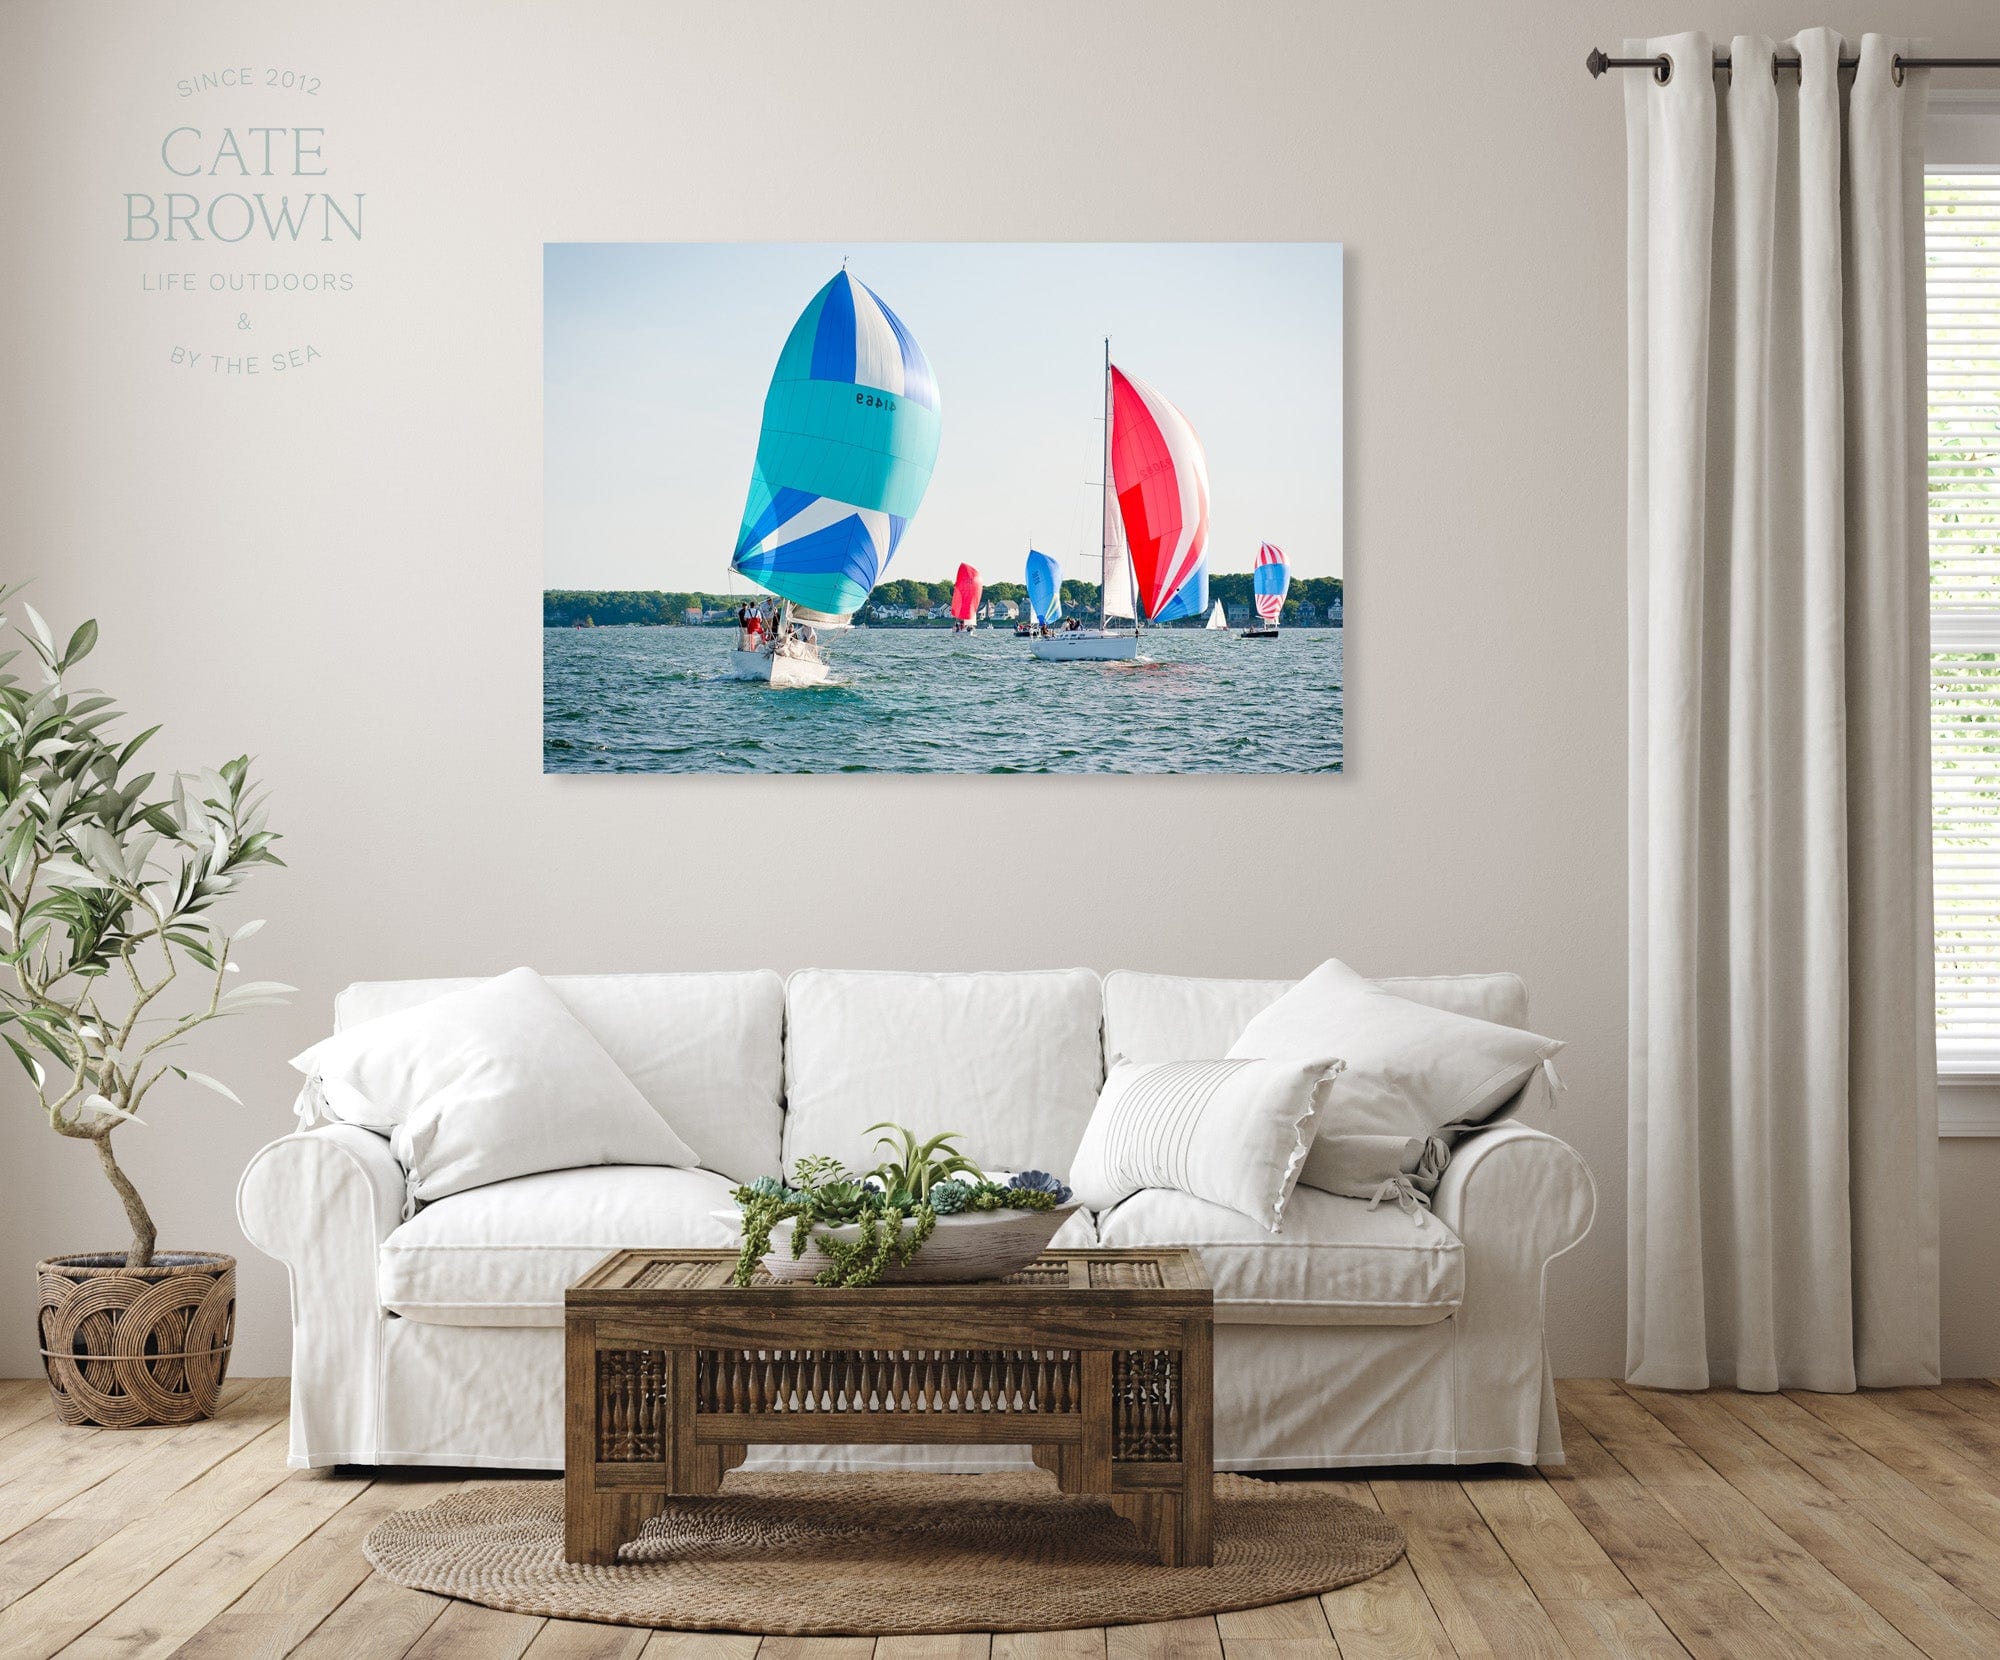 Cate Brown Photo Canvas / 16"x24" / None (Print Only) Spinnakers at Wednesday Night  //  Nautical Photography Made to Order Ocean Fine Art